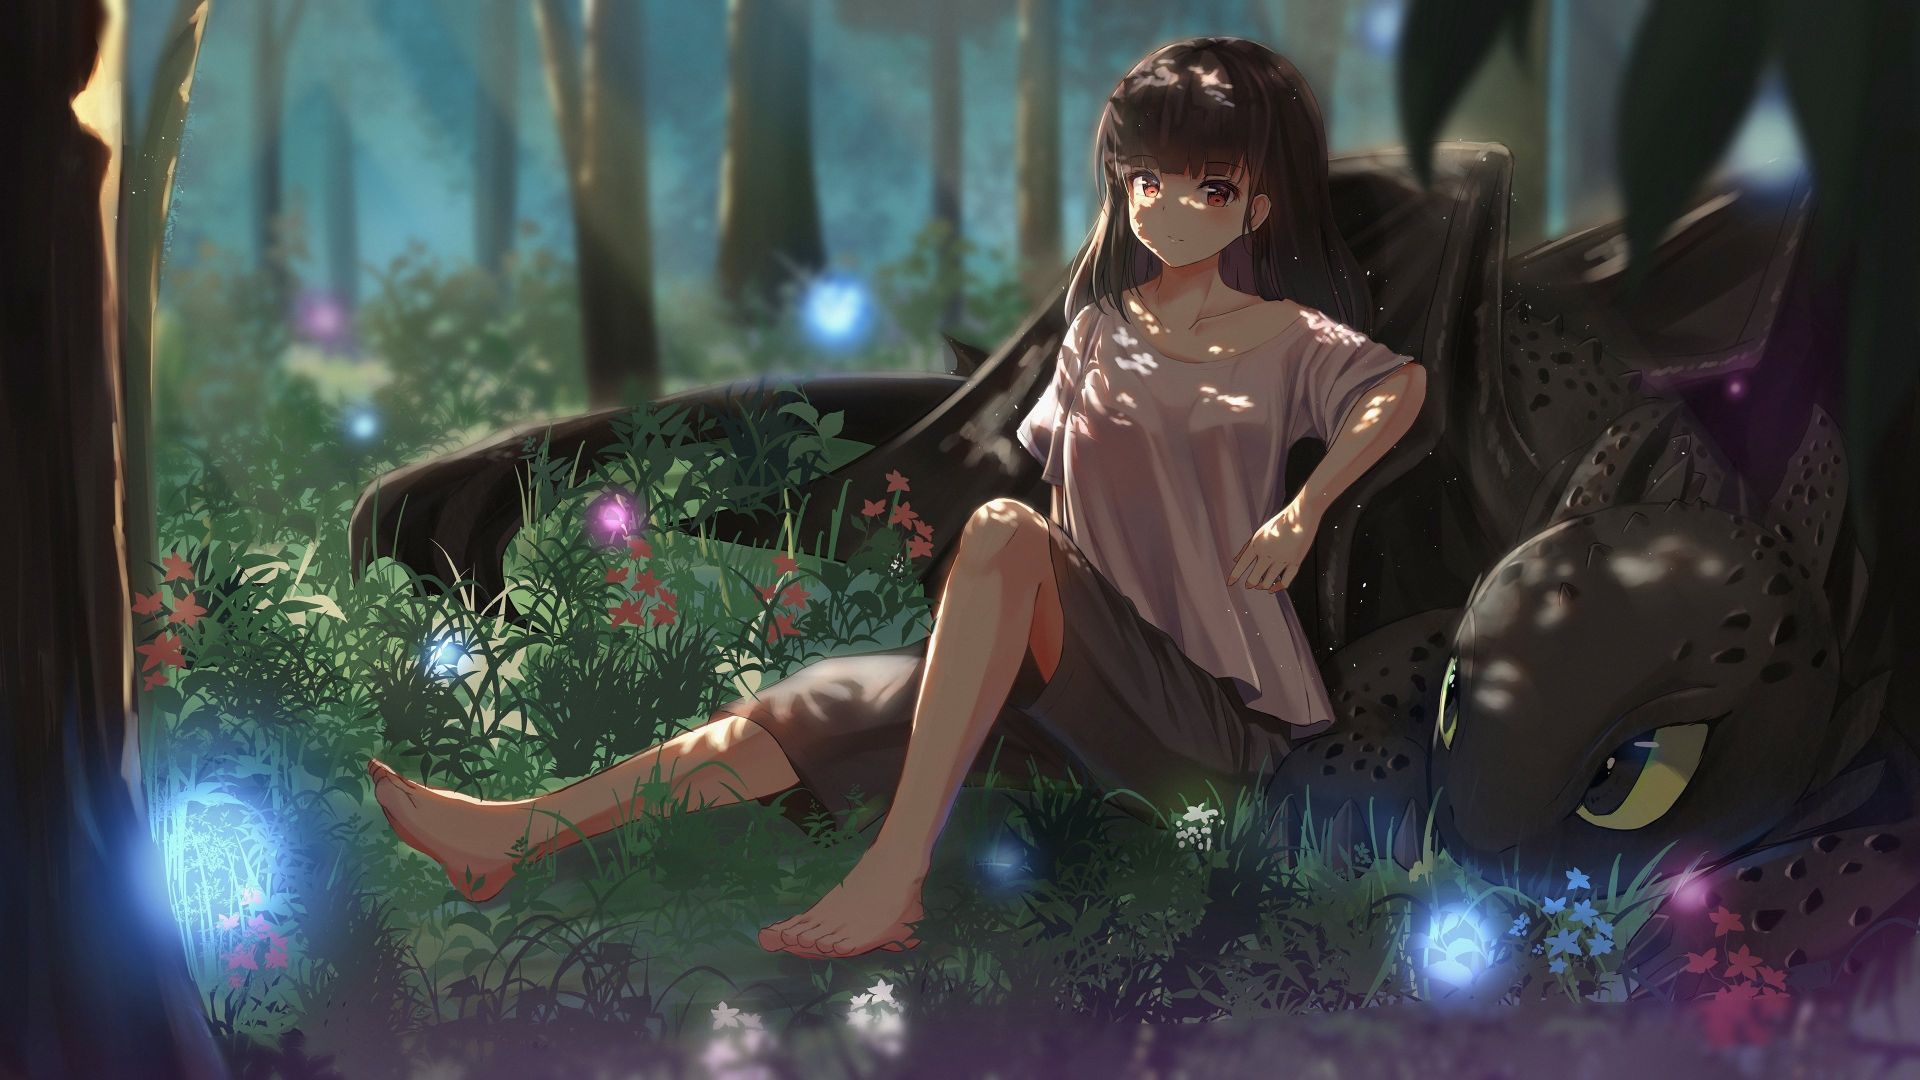 Desktop Wallpaper Dragon And Girl, Anime, Fantasy, Hd Image, Picture,  Background, 83d192